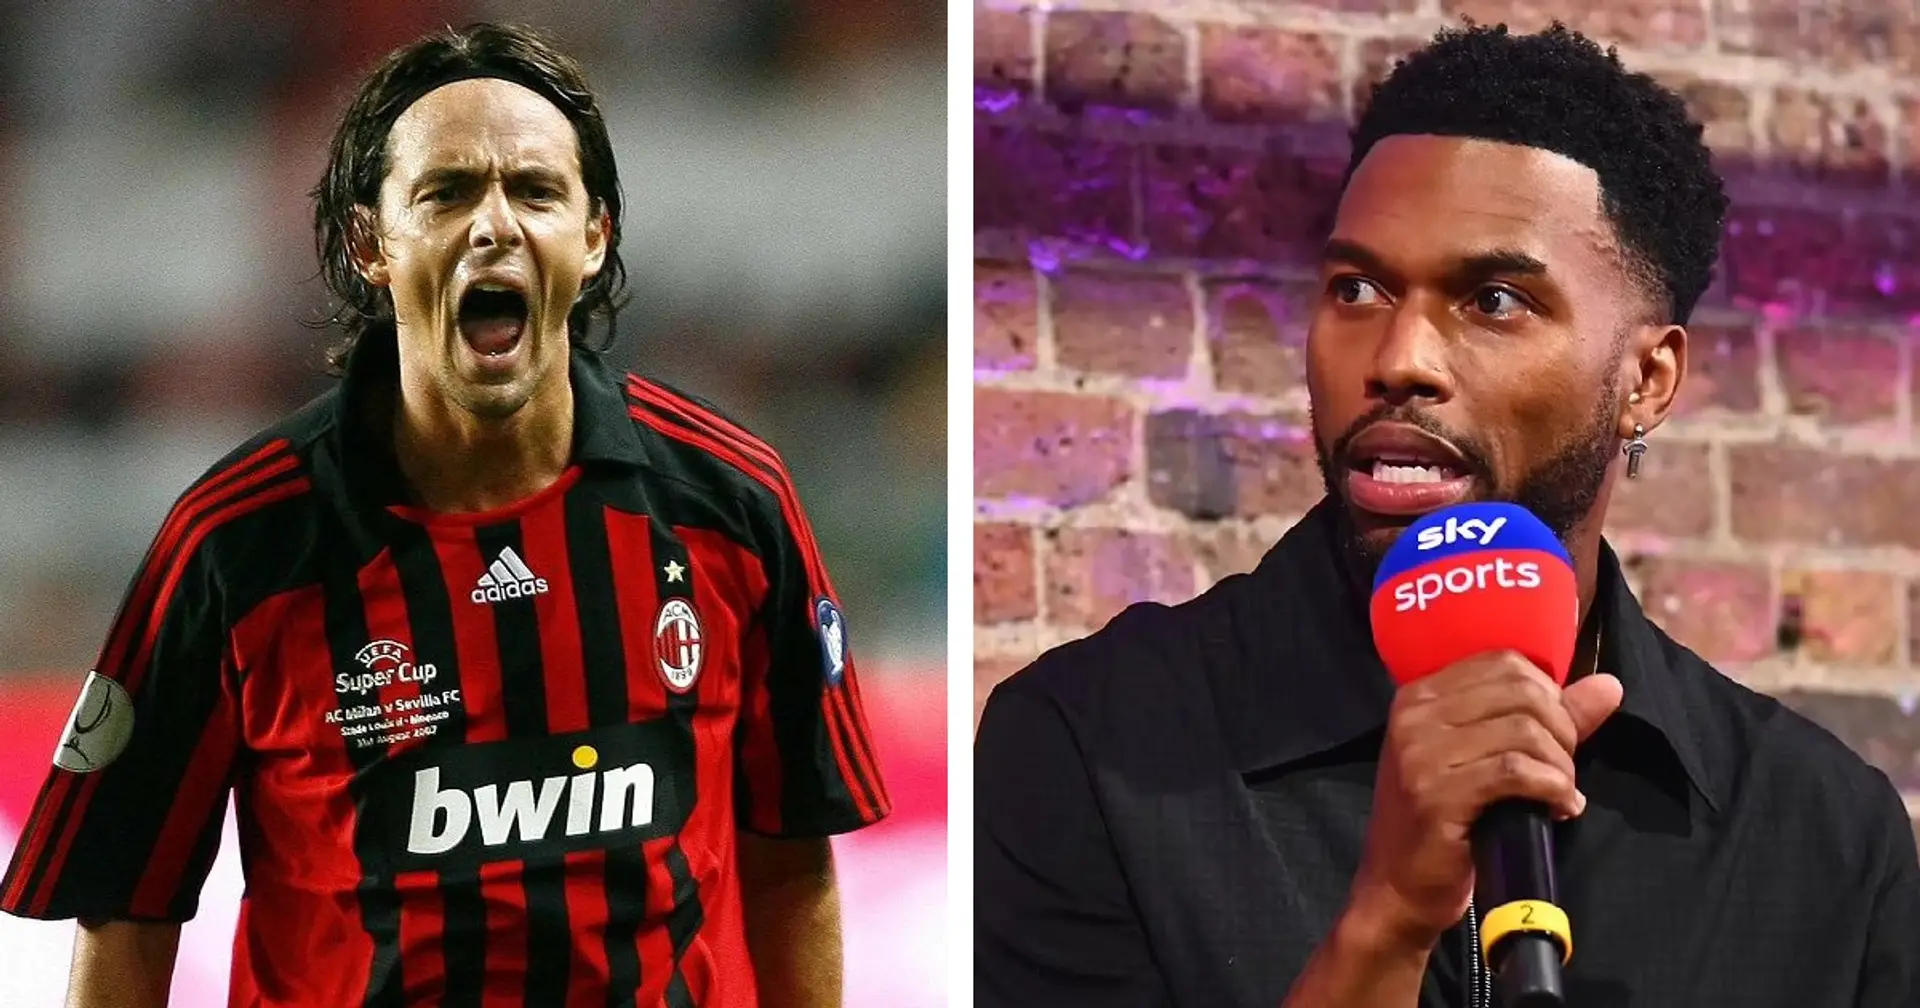 'Ancelotti told me to watch him': Sturridge reveals he watch Inzaghi DVDs at Chelsea to improve movement